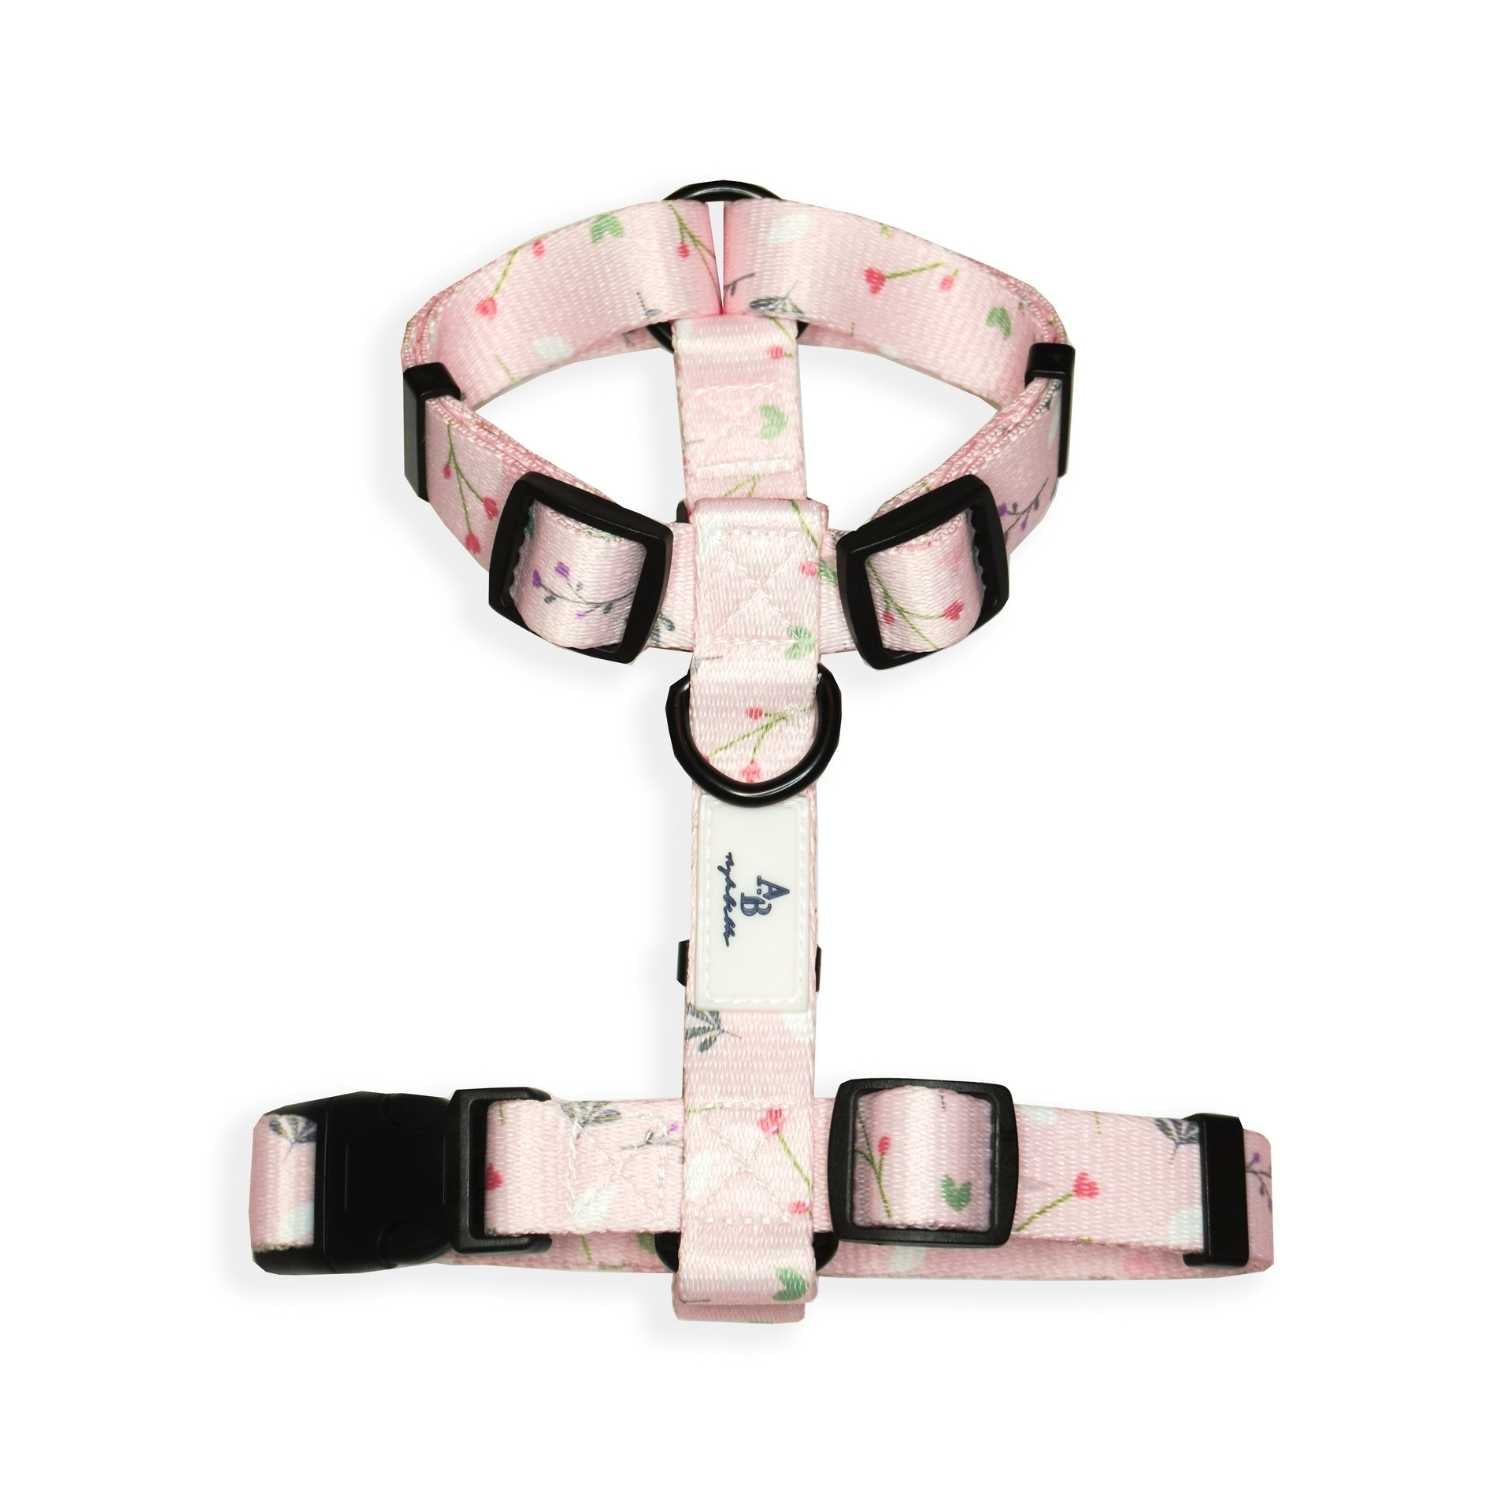 Aylabella Co. - Pink Blossom H-Harness - Dog Accessories (3 Sizes)